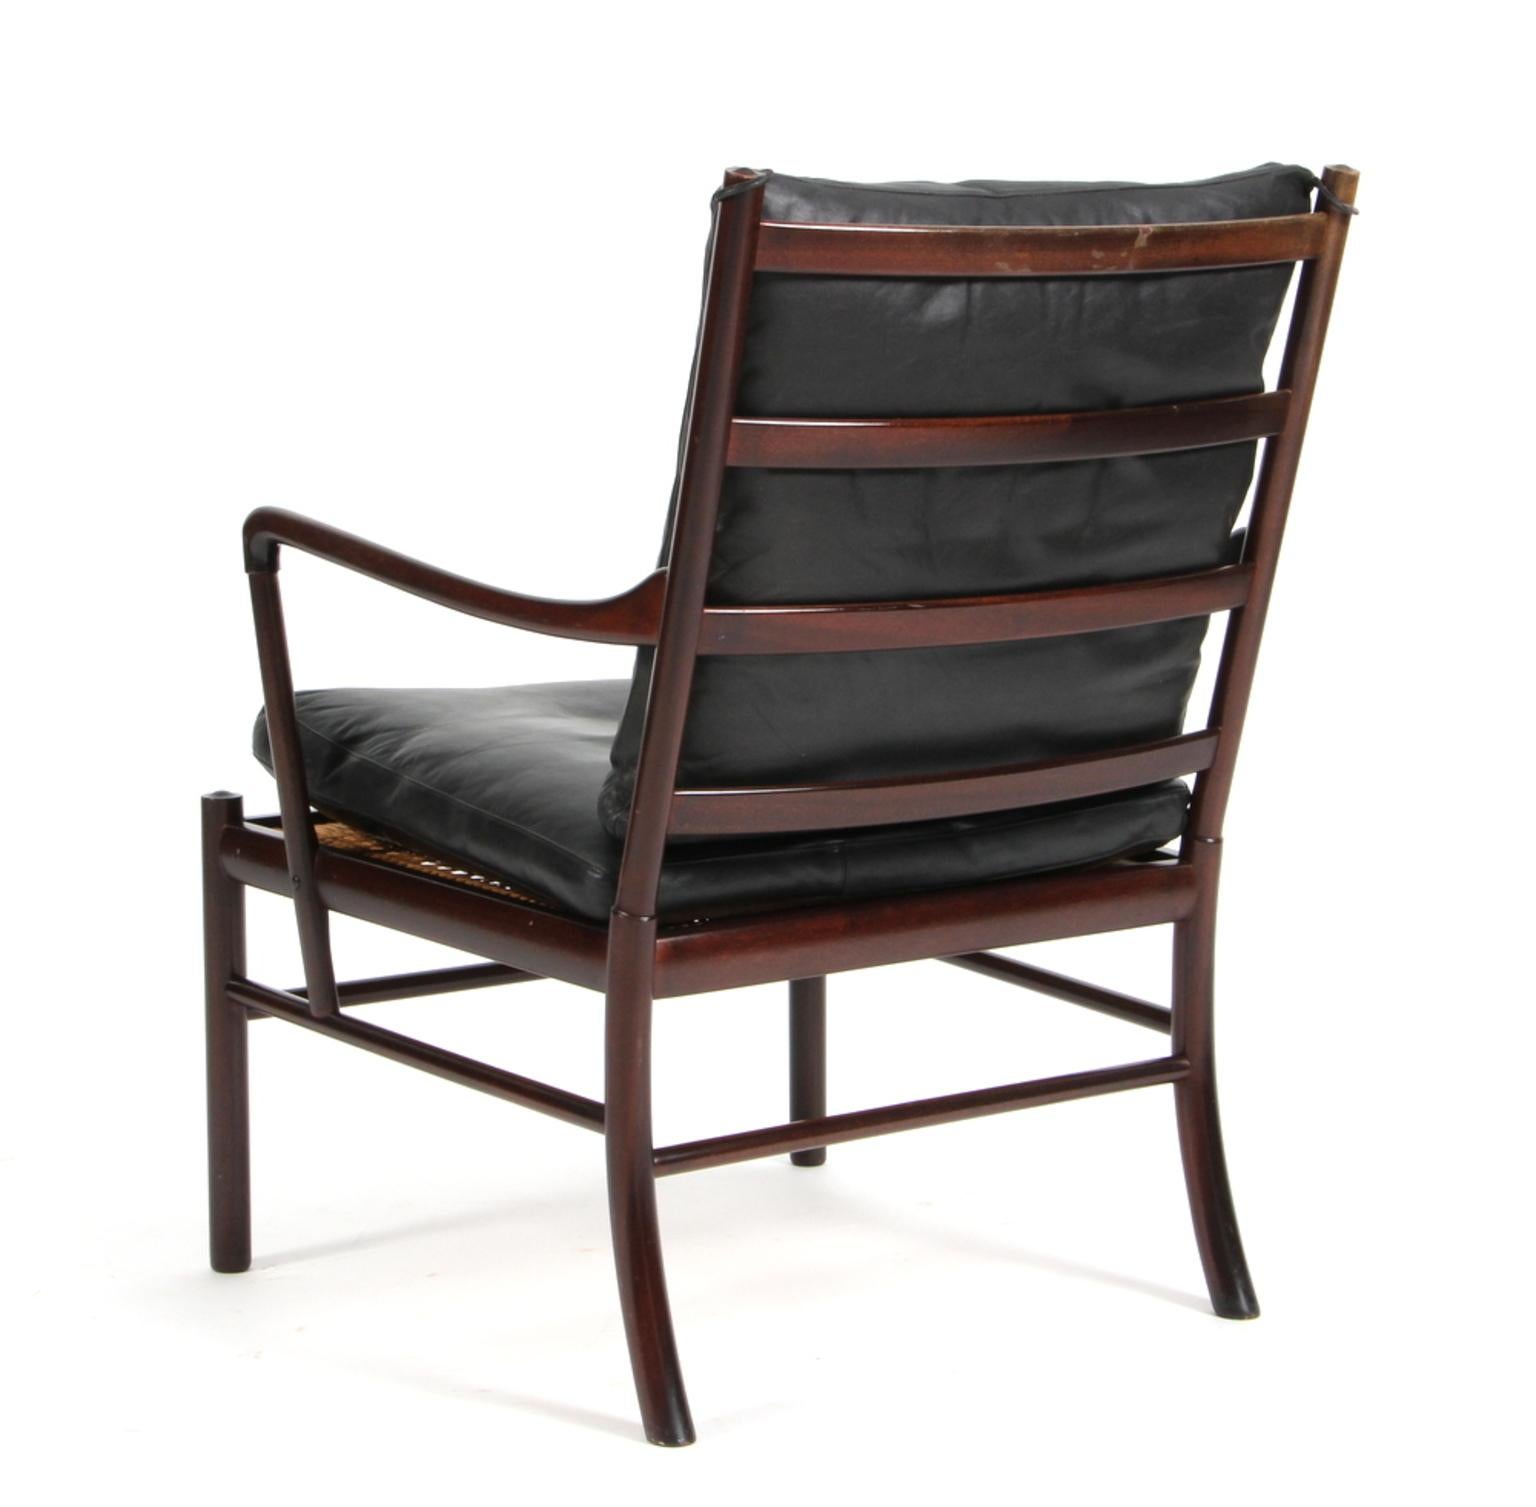 Scandinavian Modern Ole Wanscher Colonial Chair in Mahogany and Original Leather, PJ 149